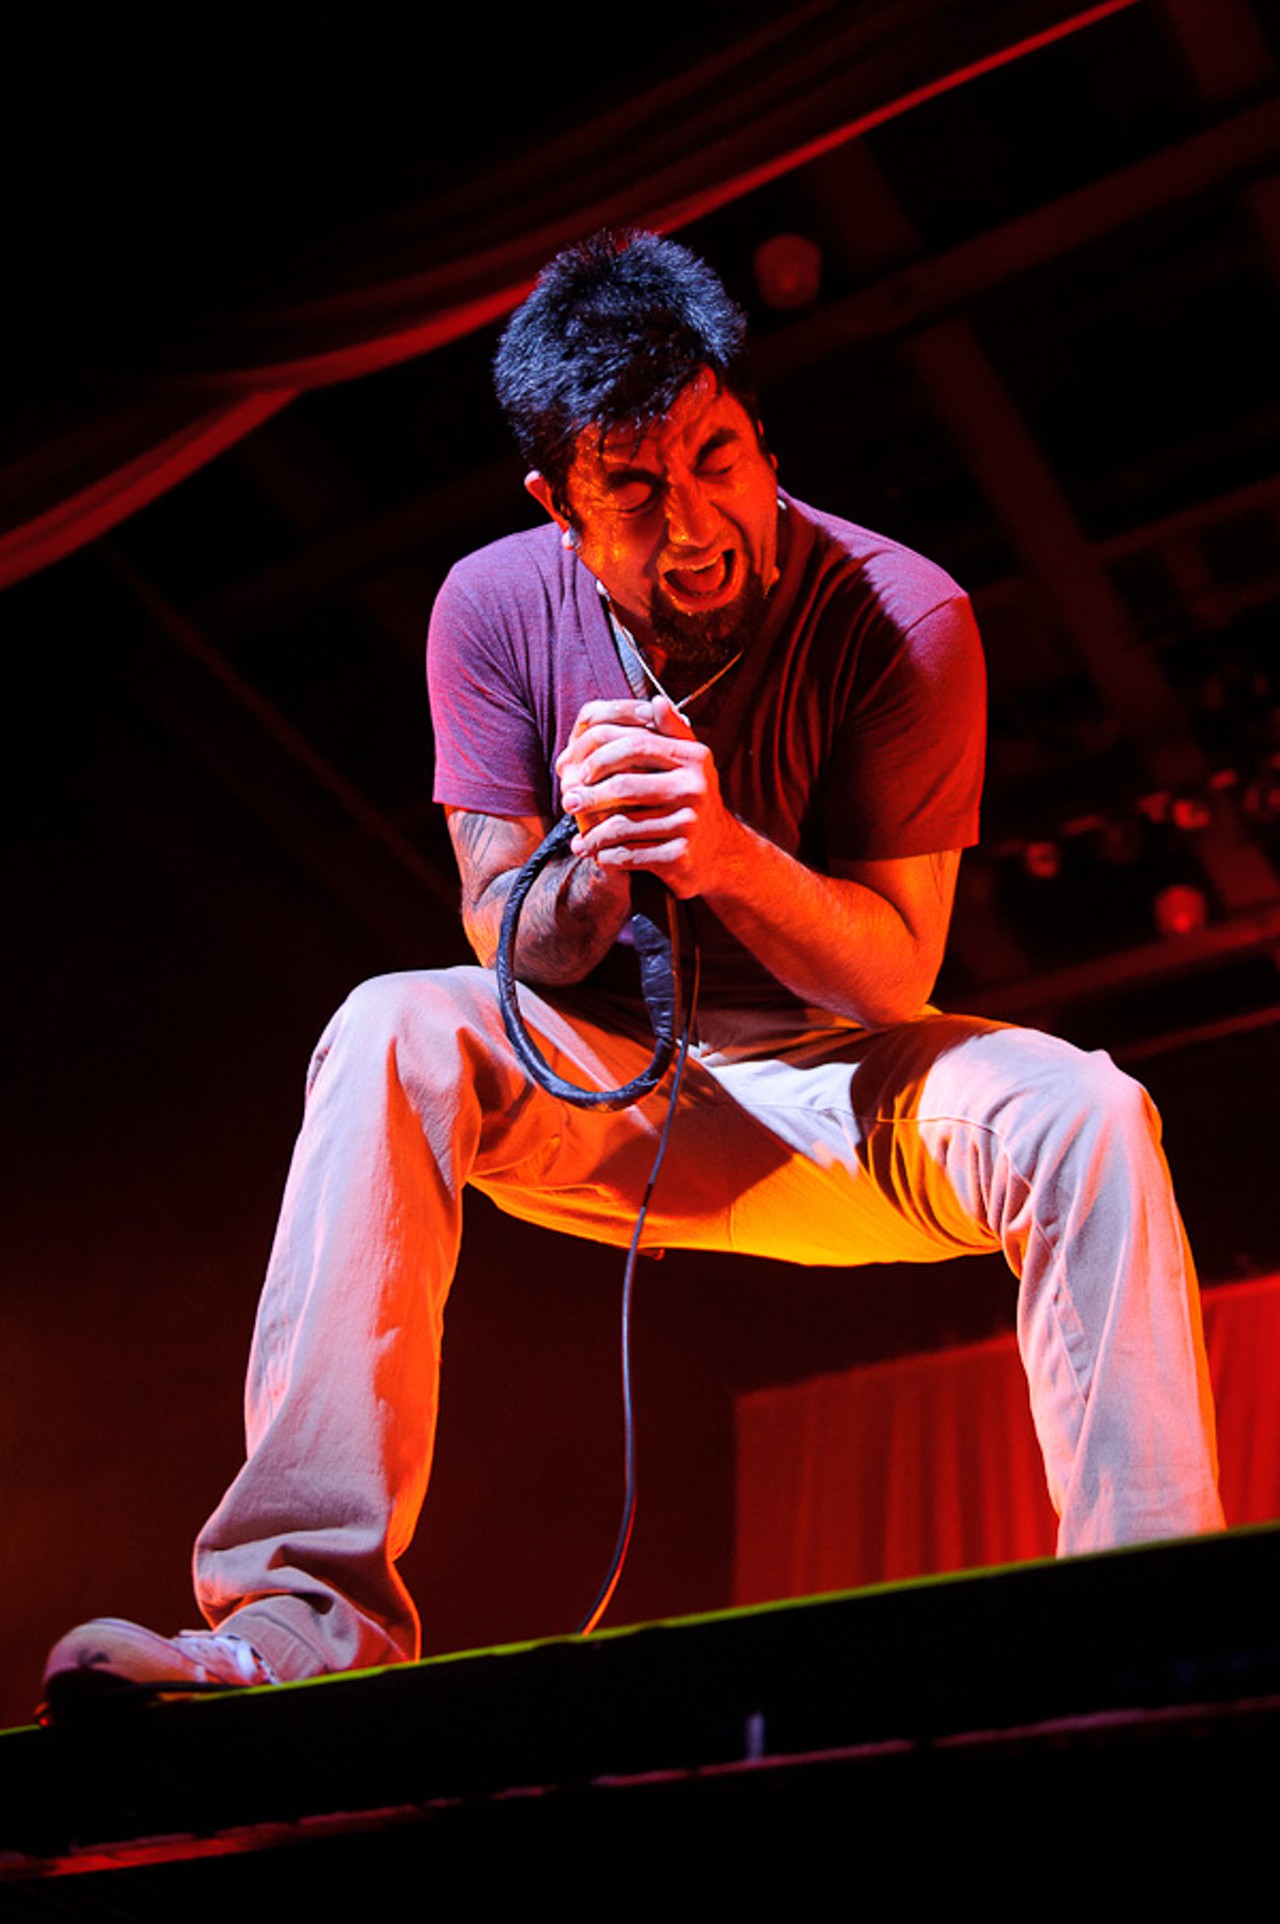 Deftones performing at the Pageant.